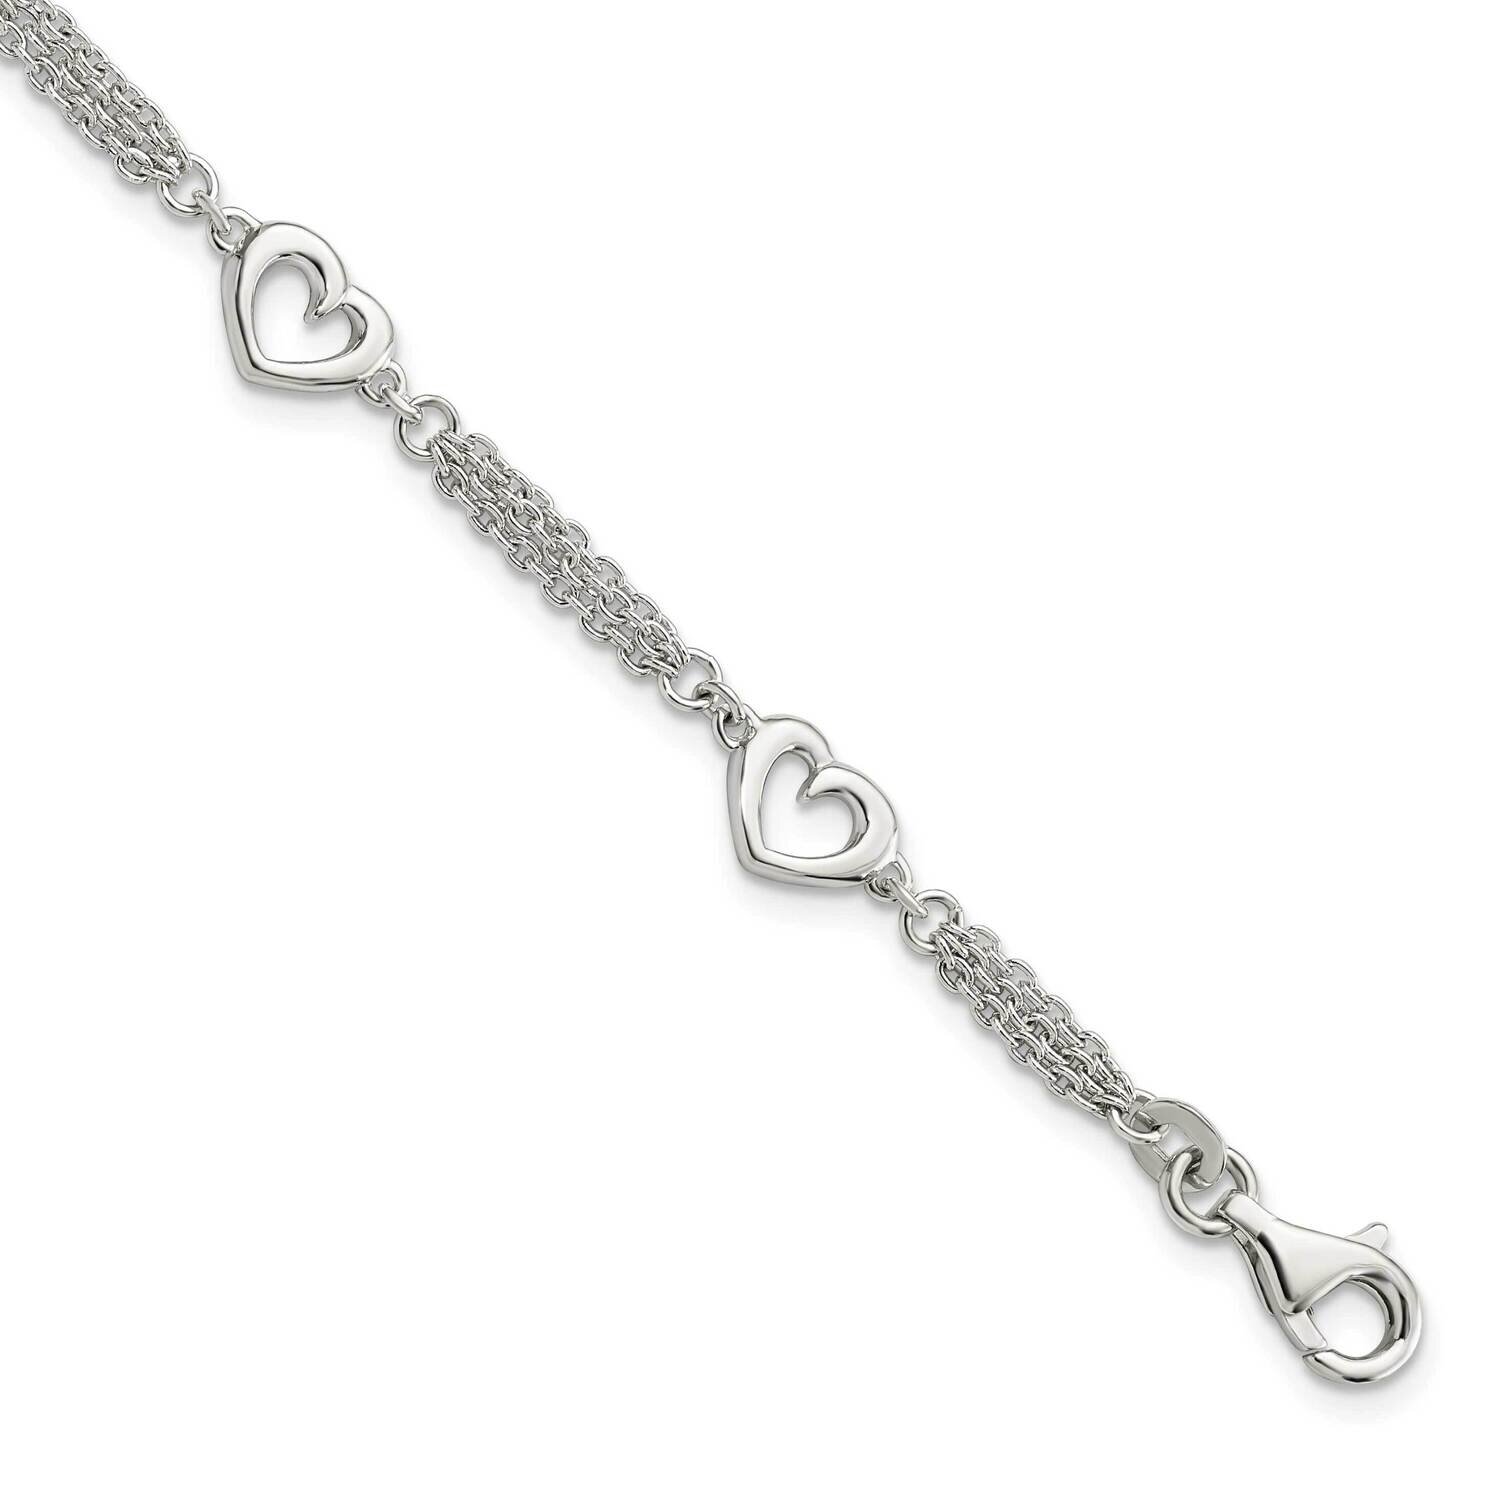 Hearts 7.5 Inch with 1.0 In Extender Bracelet Sterling Silver Polished QG5787-7.5